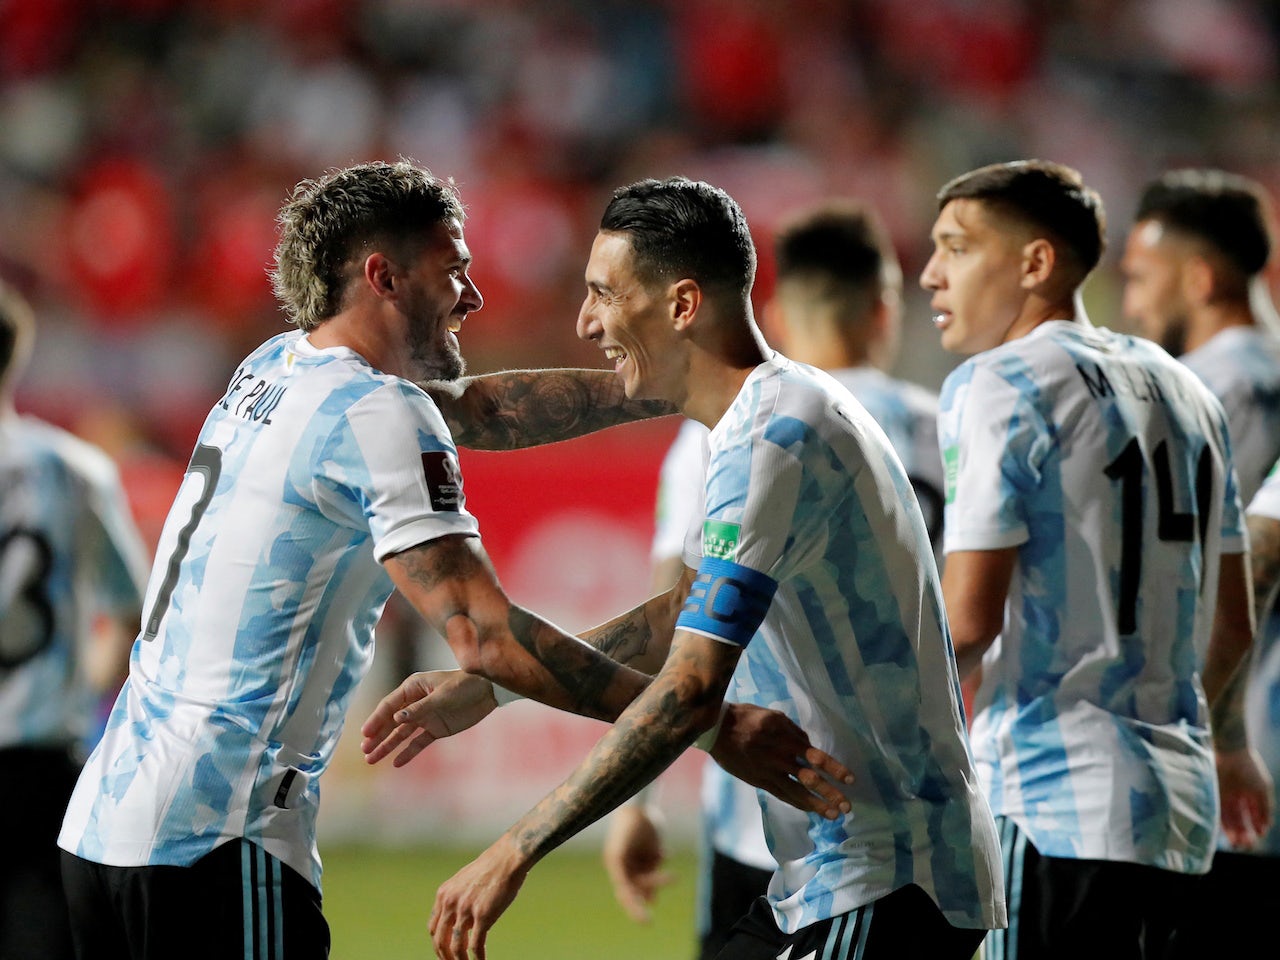 Argentina vs Venezuela LIVE: When and where to watch FIFA World Cup Qualifiers Live streaming? Latest Team News, Predicted Lineups and Live Telecast details